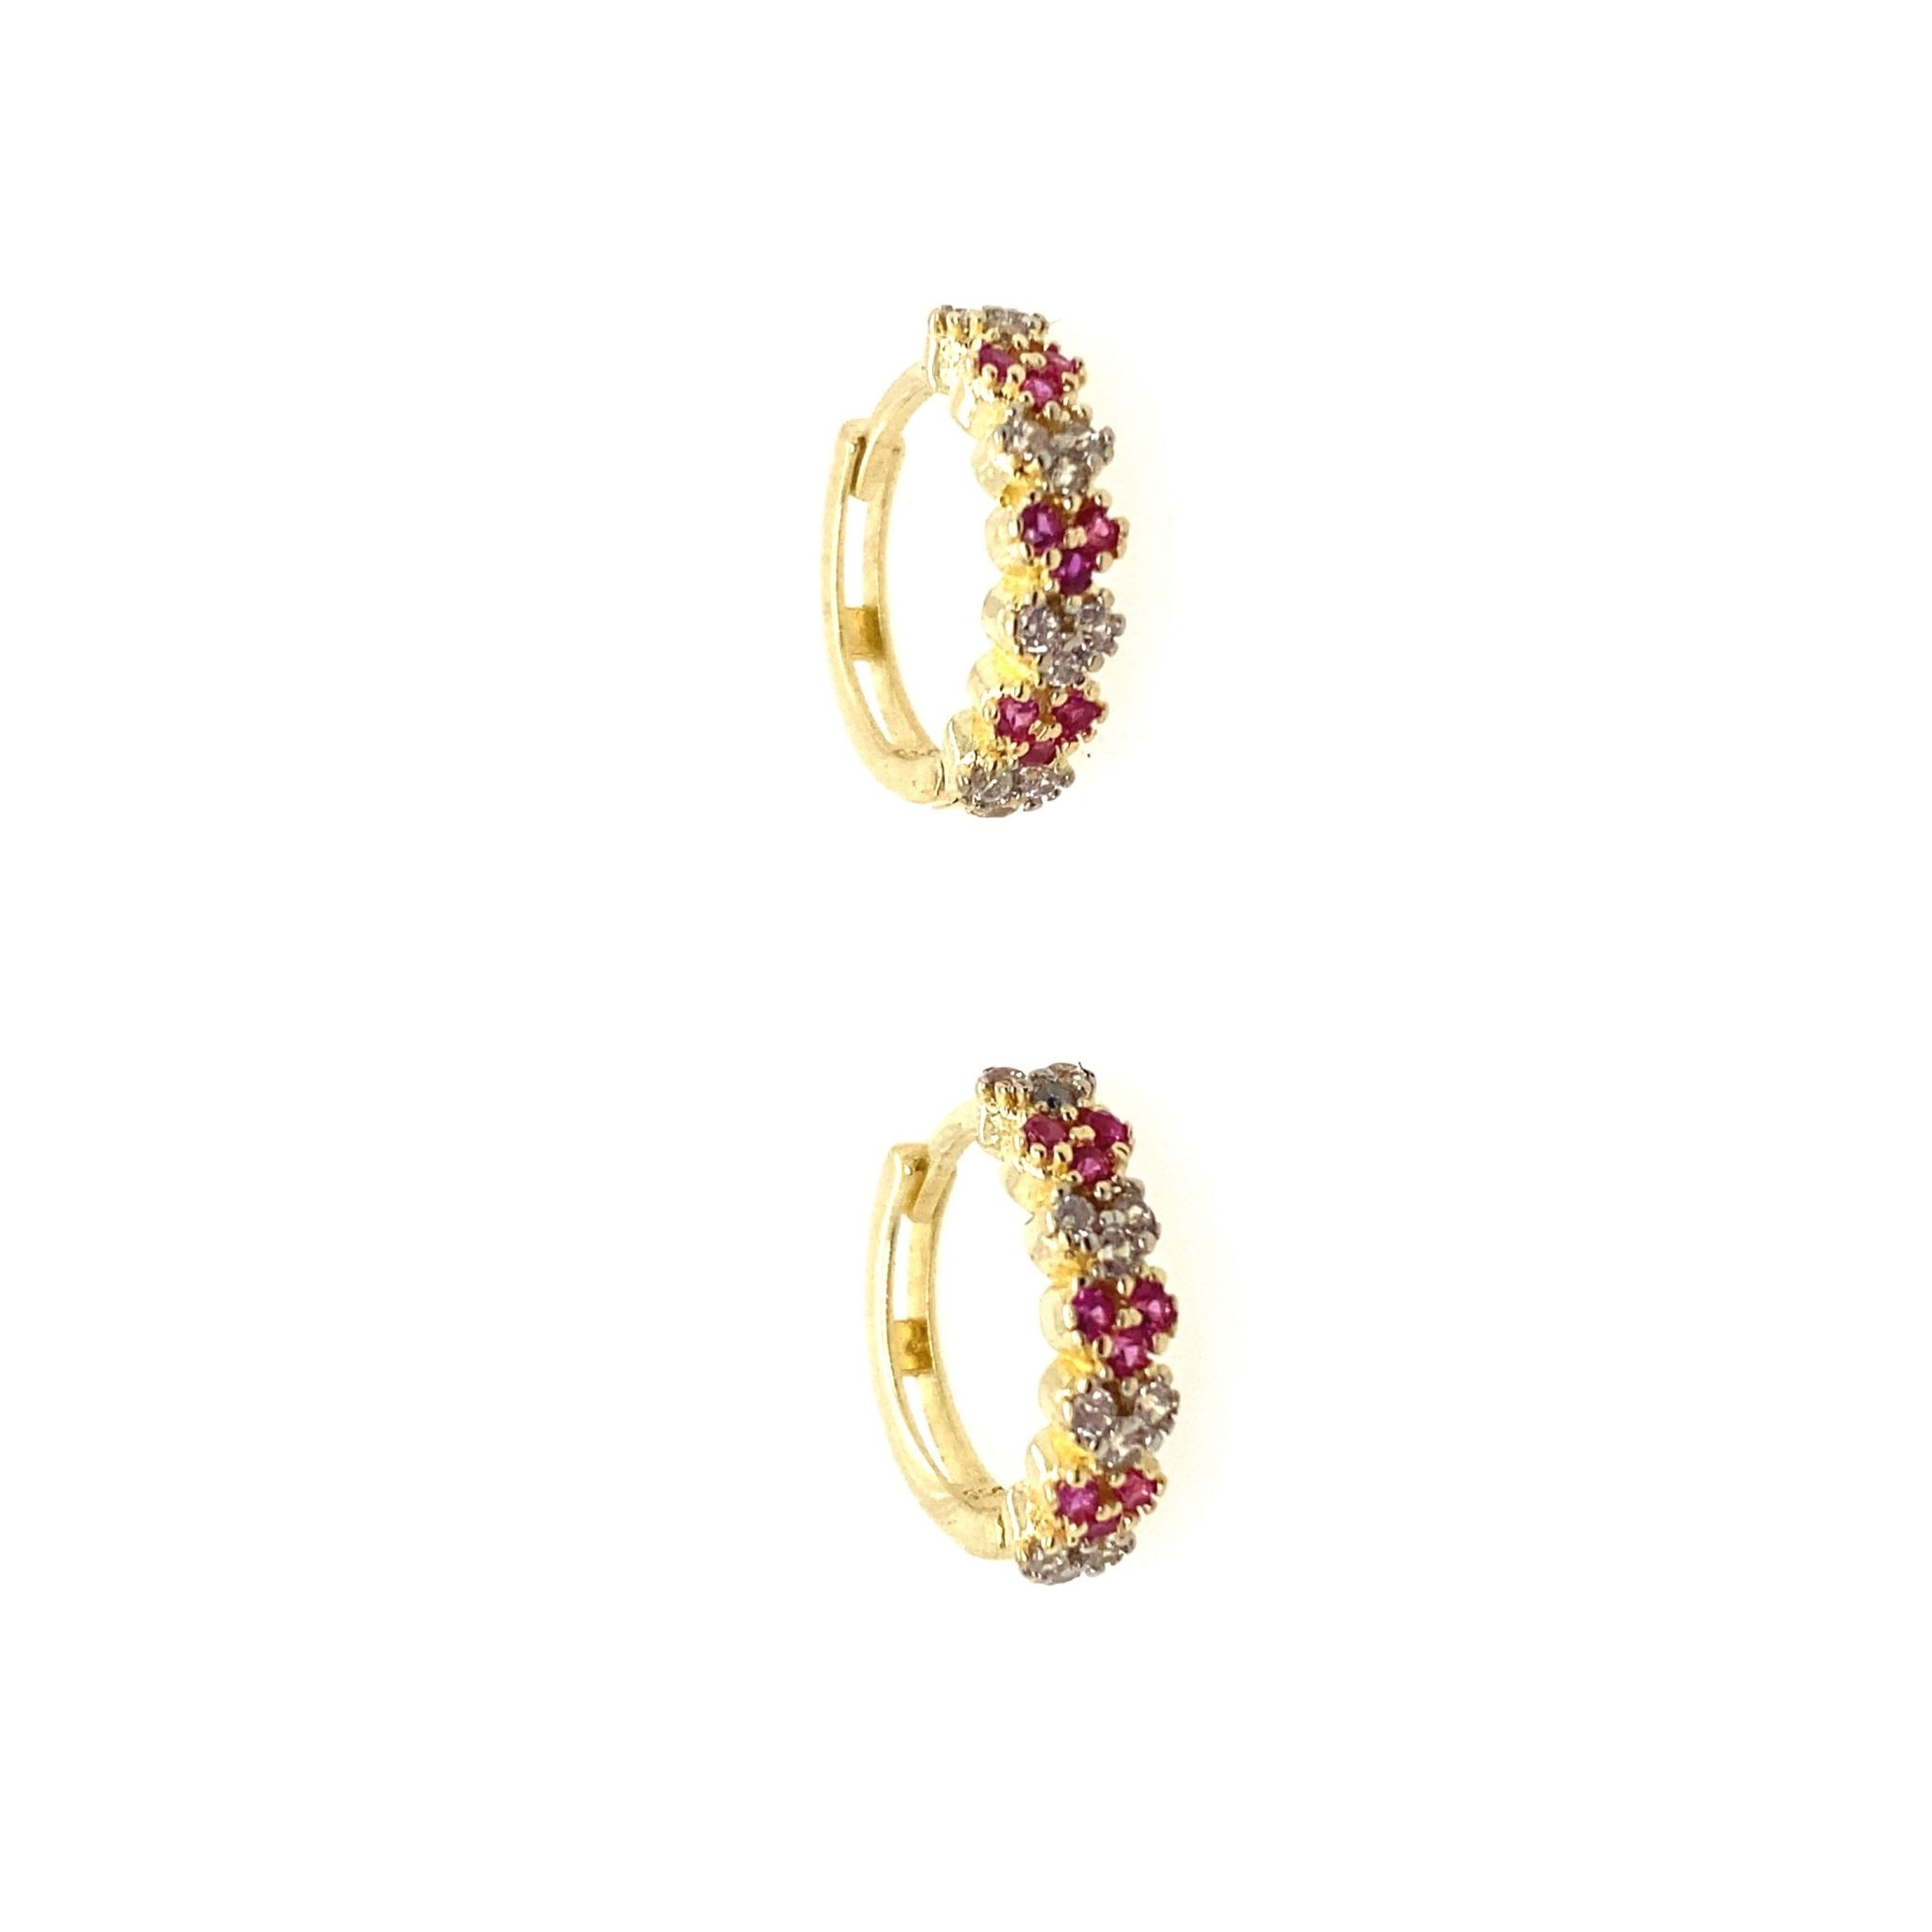 32174 14K YELLOW GOLD CLUSTER PINK AND WHITE CUBIC ZIROCNIA HUGGIES